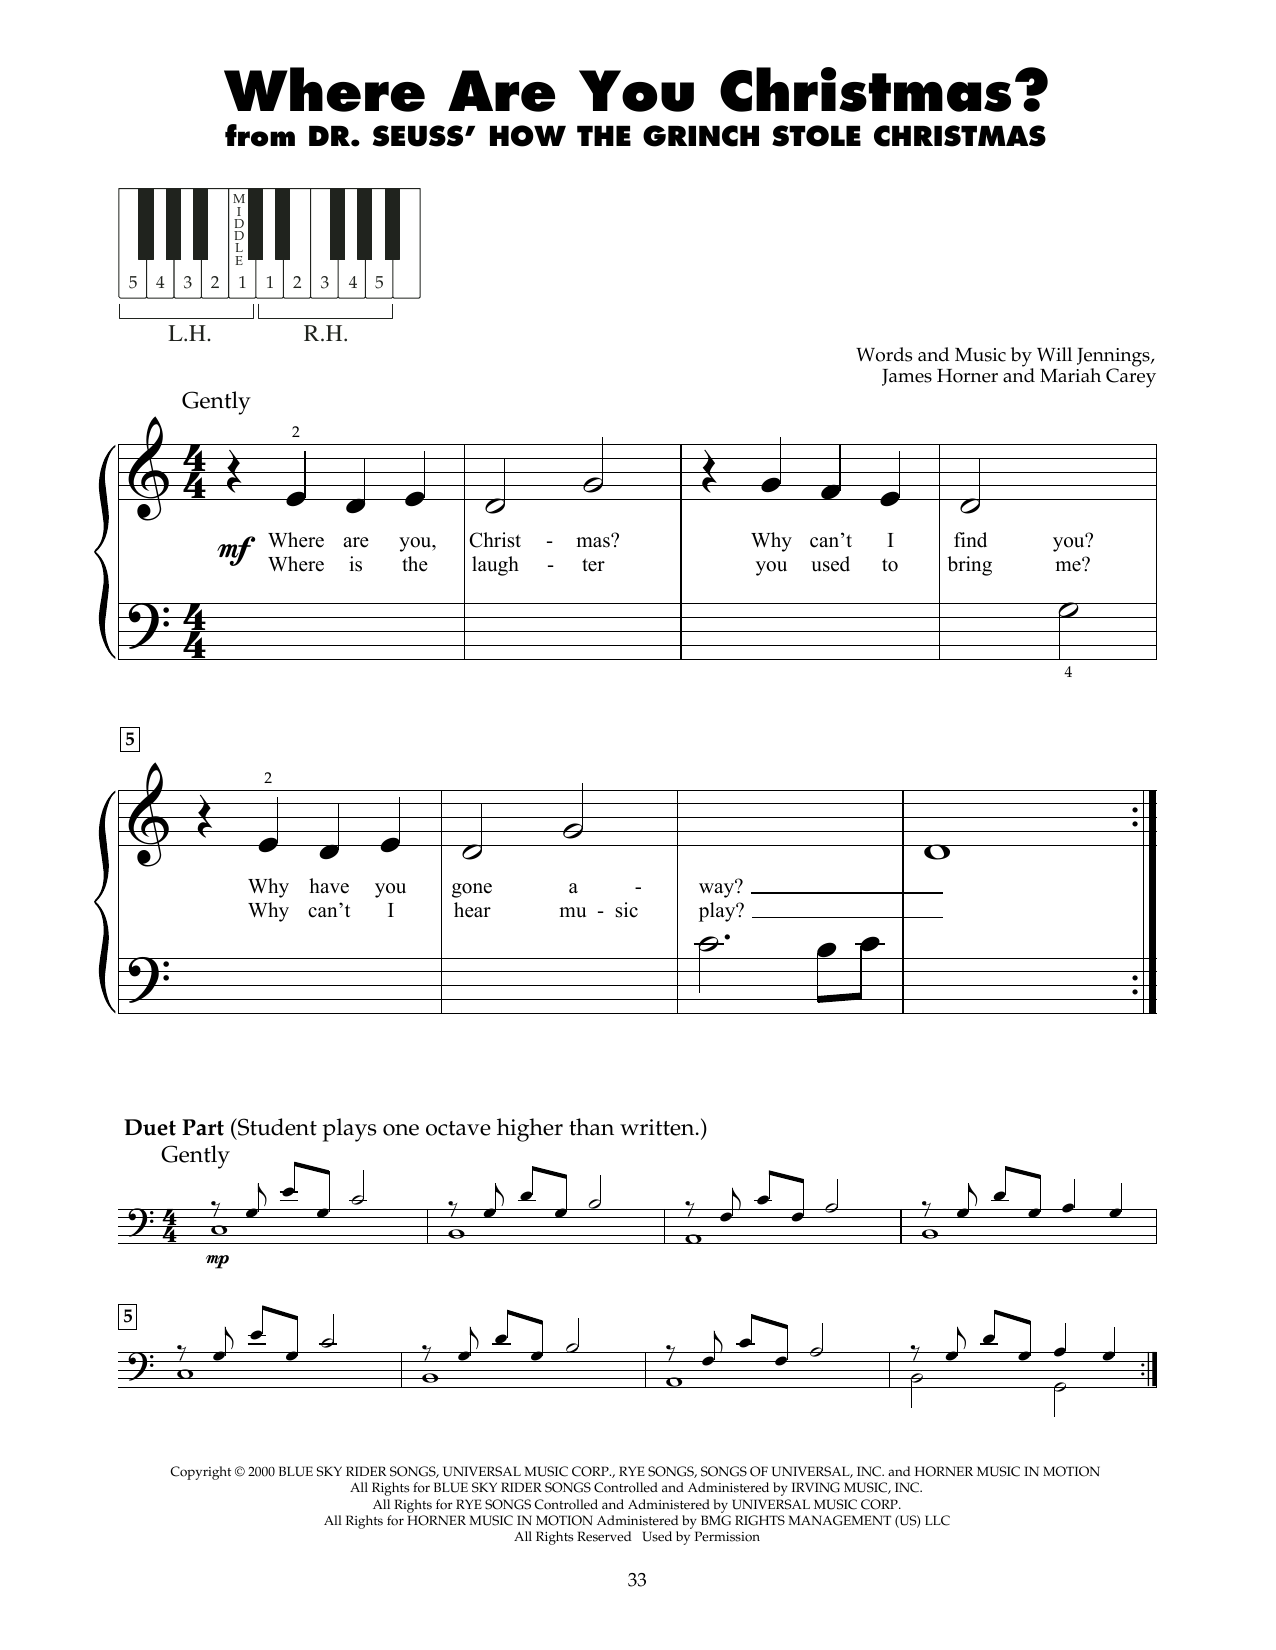 Faith Hill Where Are You Christmas? (from How The Grinch Stole Christmas) sheet music notes printable PDF score